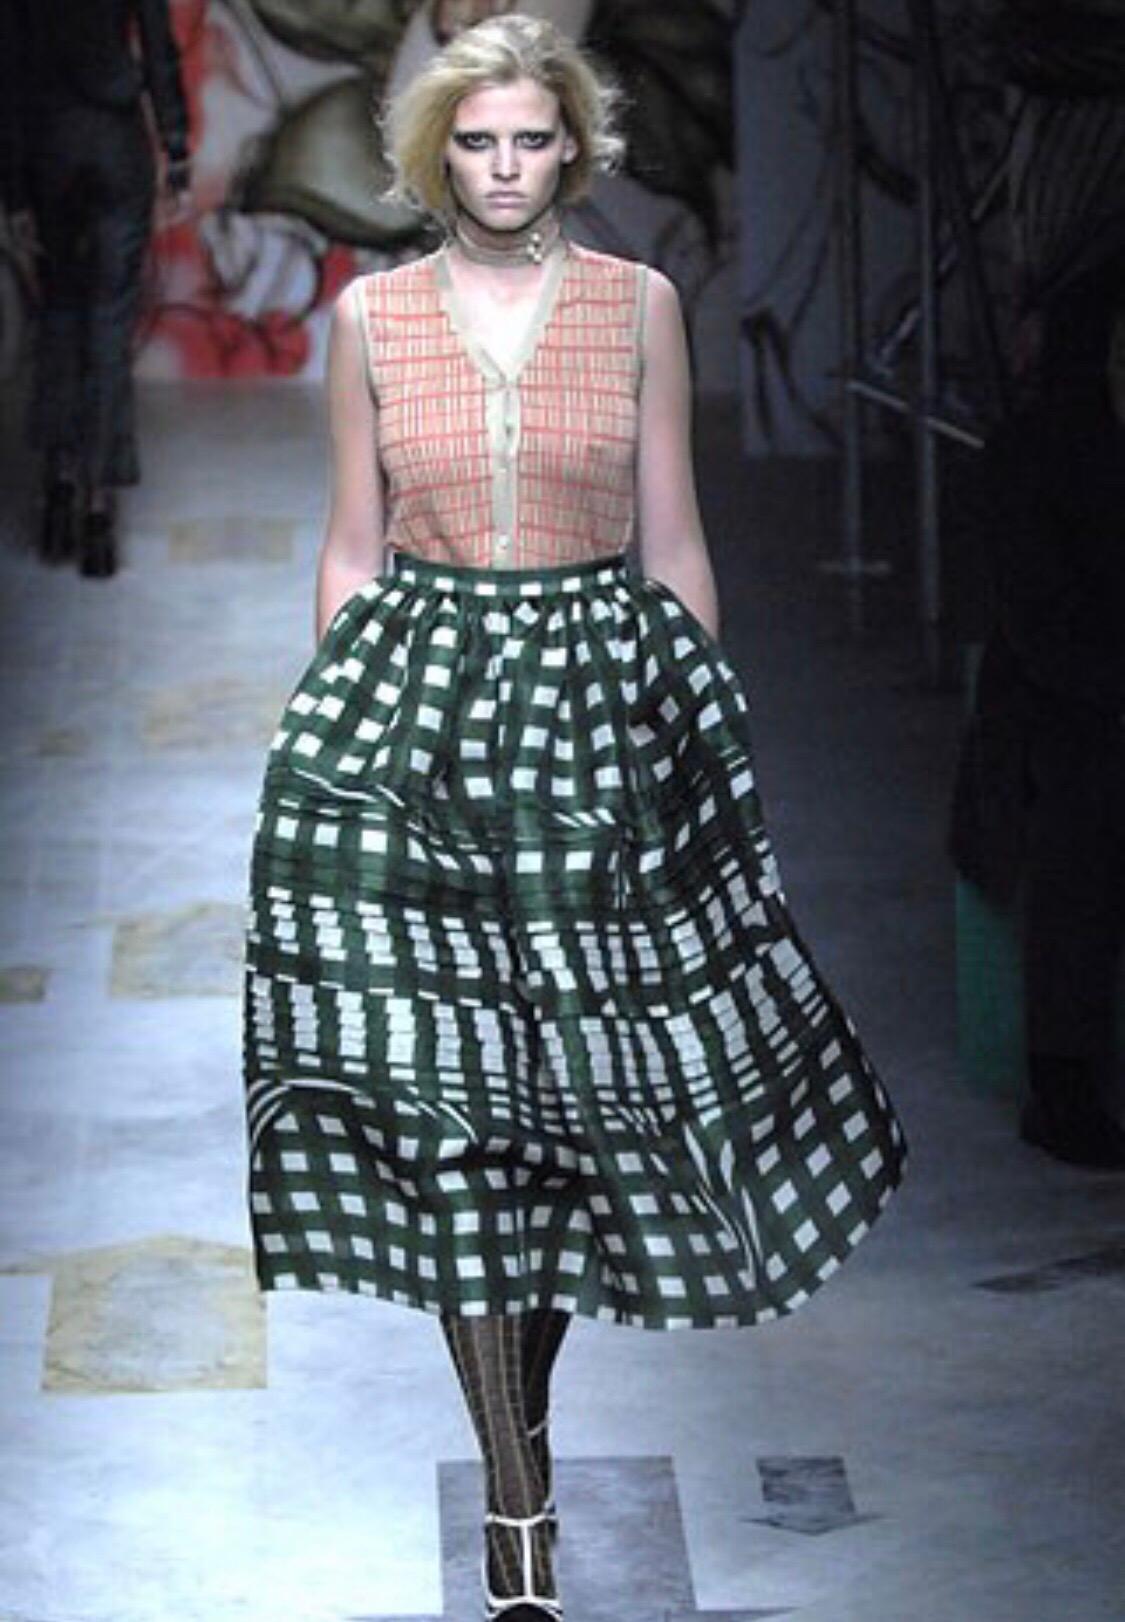 Rare PRADA Fairy Collection Spring 2008 green and white silk A - Line runway skirt! Features vibrant green and white checkered brushstroke print throughout, with palm leaves sporadically printed throughout. Prada logo discreetly printed throughout.